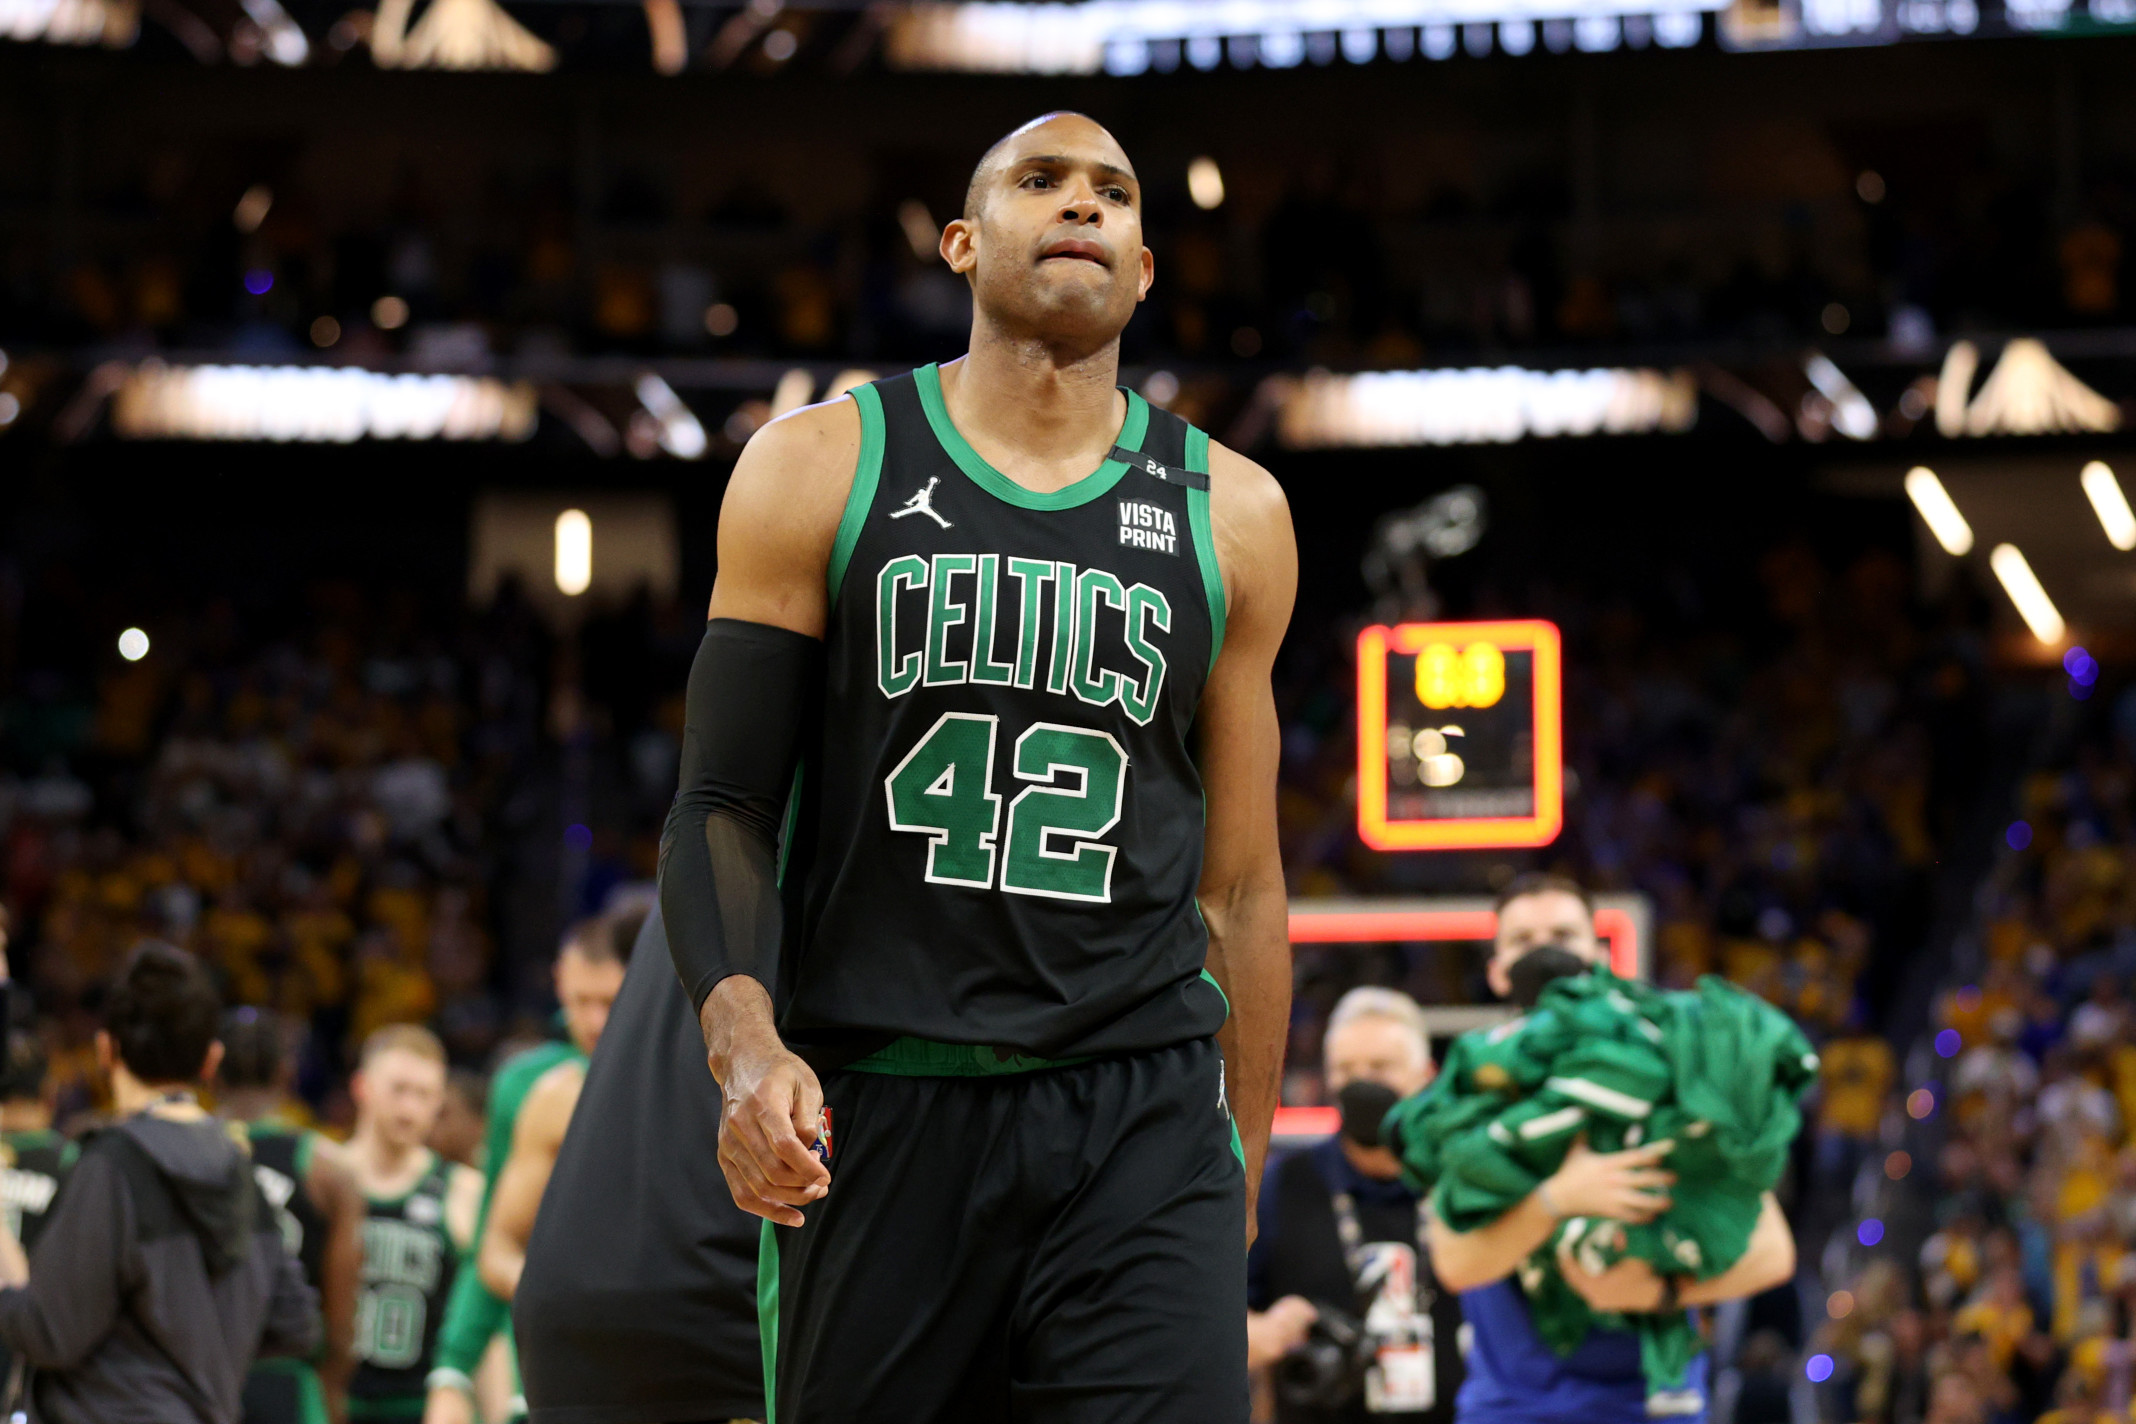 Al Horford stopped Celtics practice for this message before Game 1